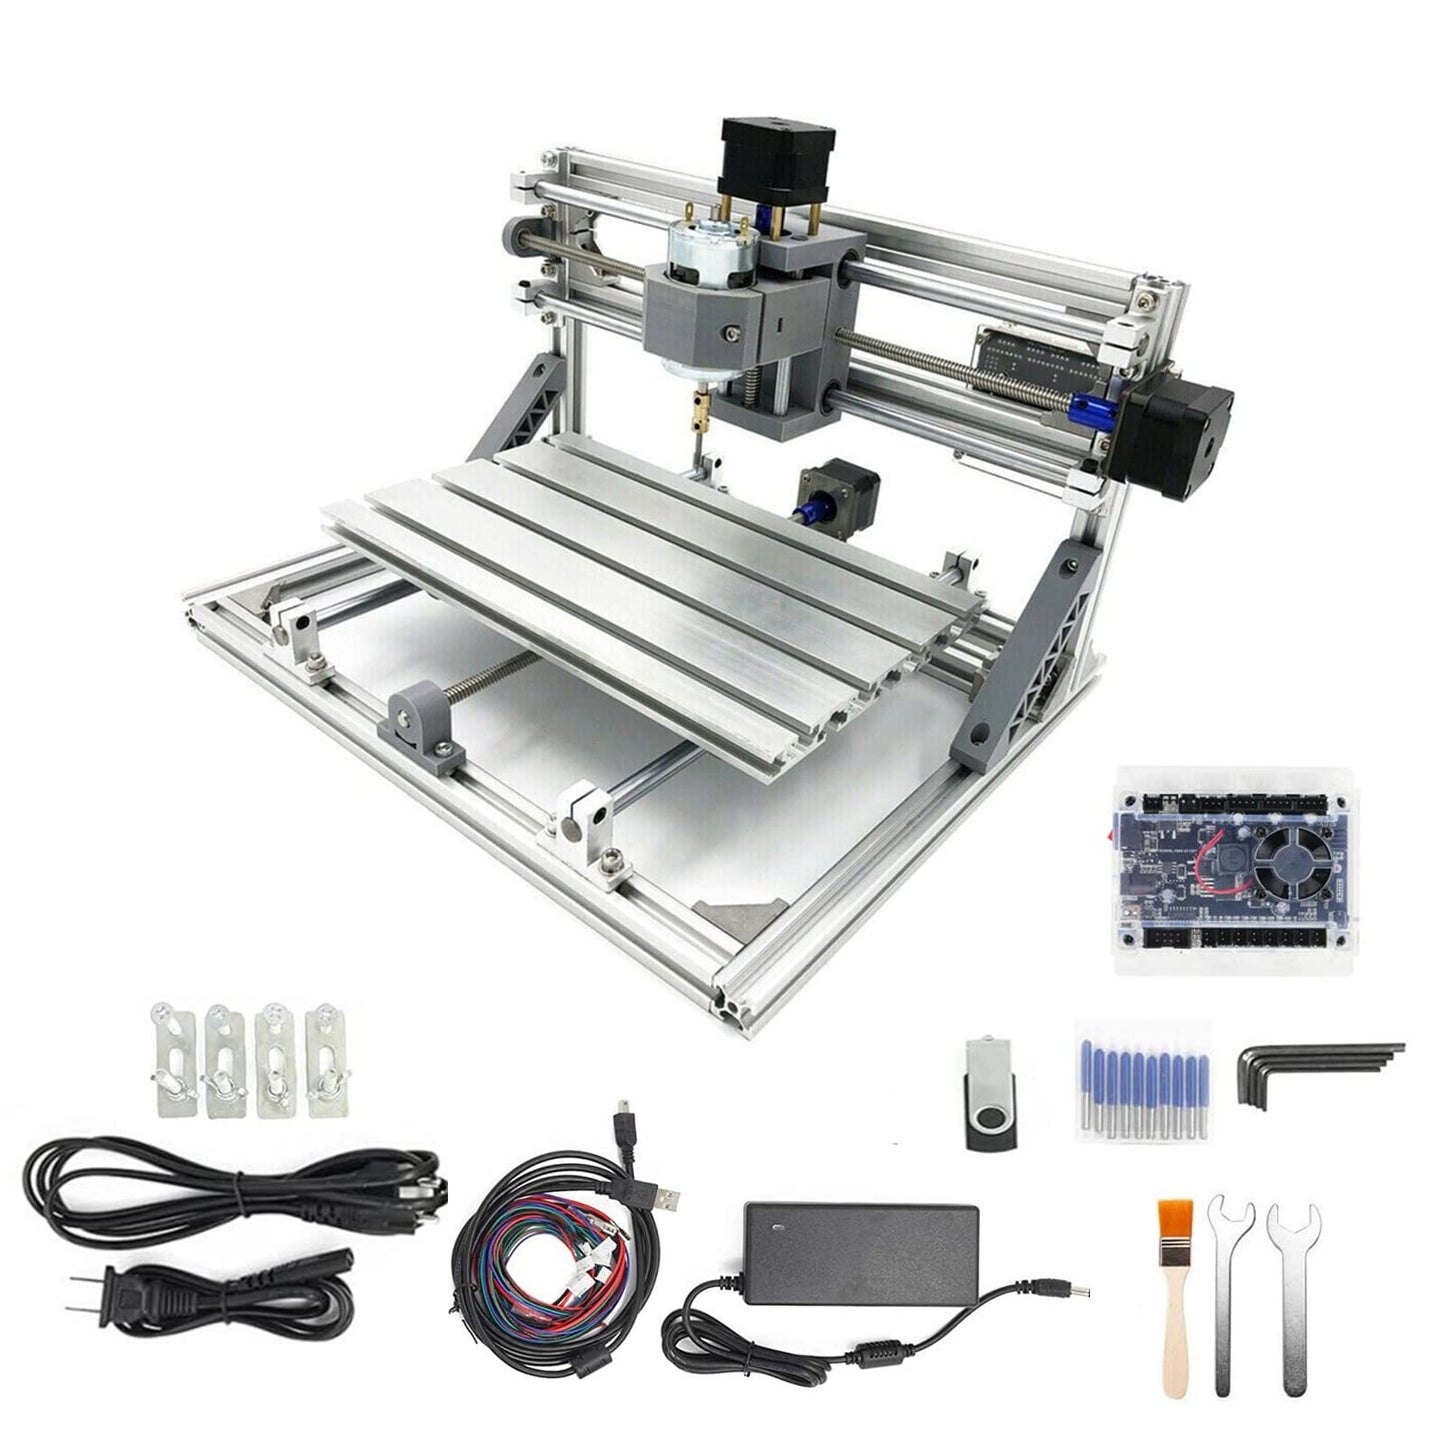 CNCTOPBAOS 3 Axis Desktop DIY Mini CNC 3018 Router Kit GRBL Control Plastic Acrylic PCB PVC Wood Carving Milling Engraving Machine Working Area